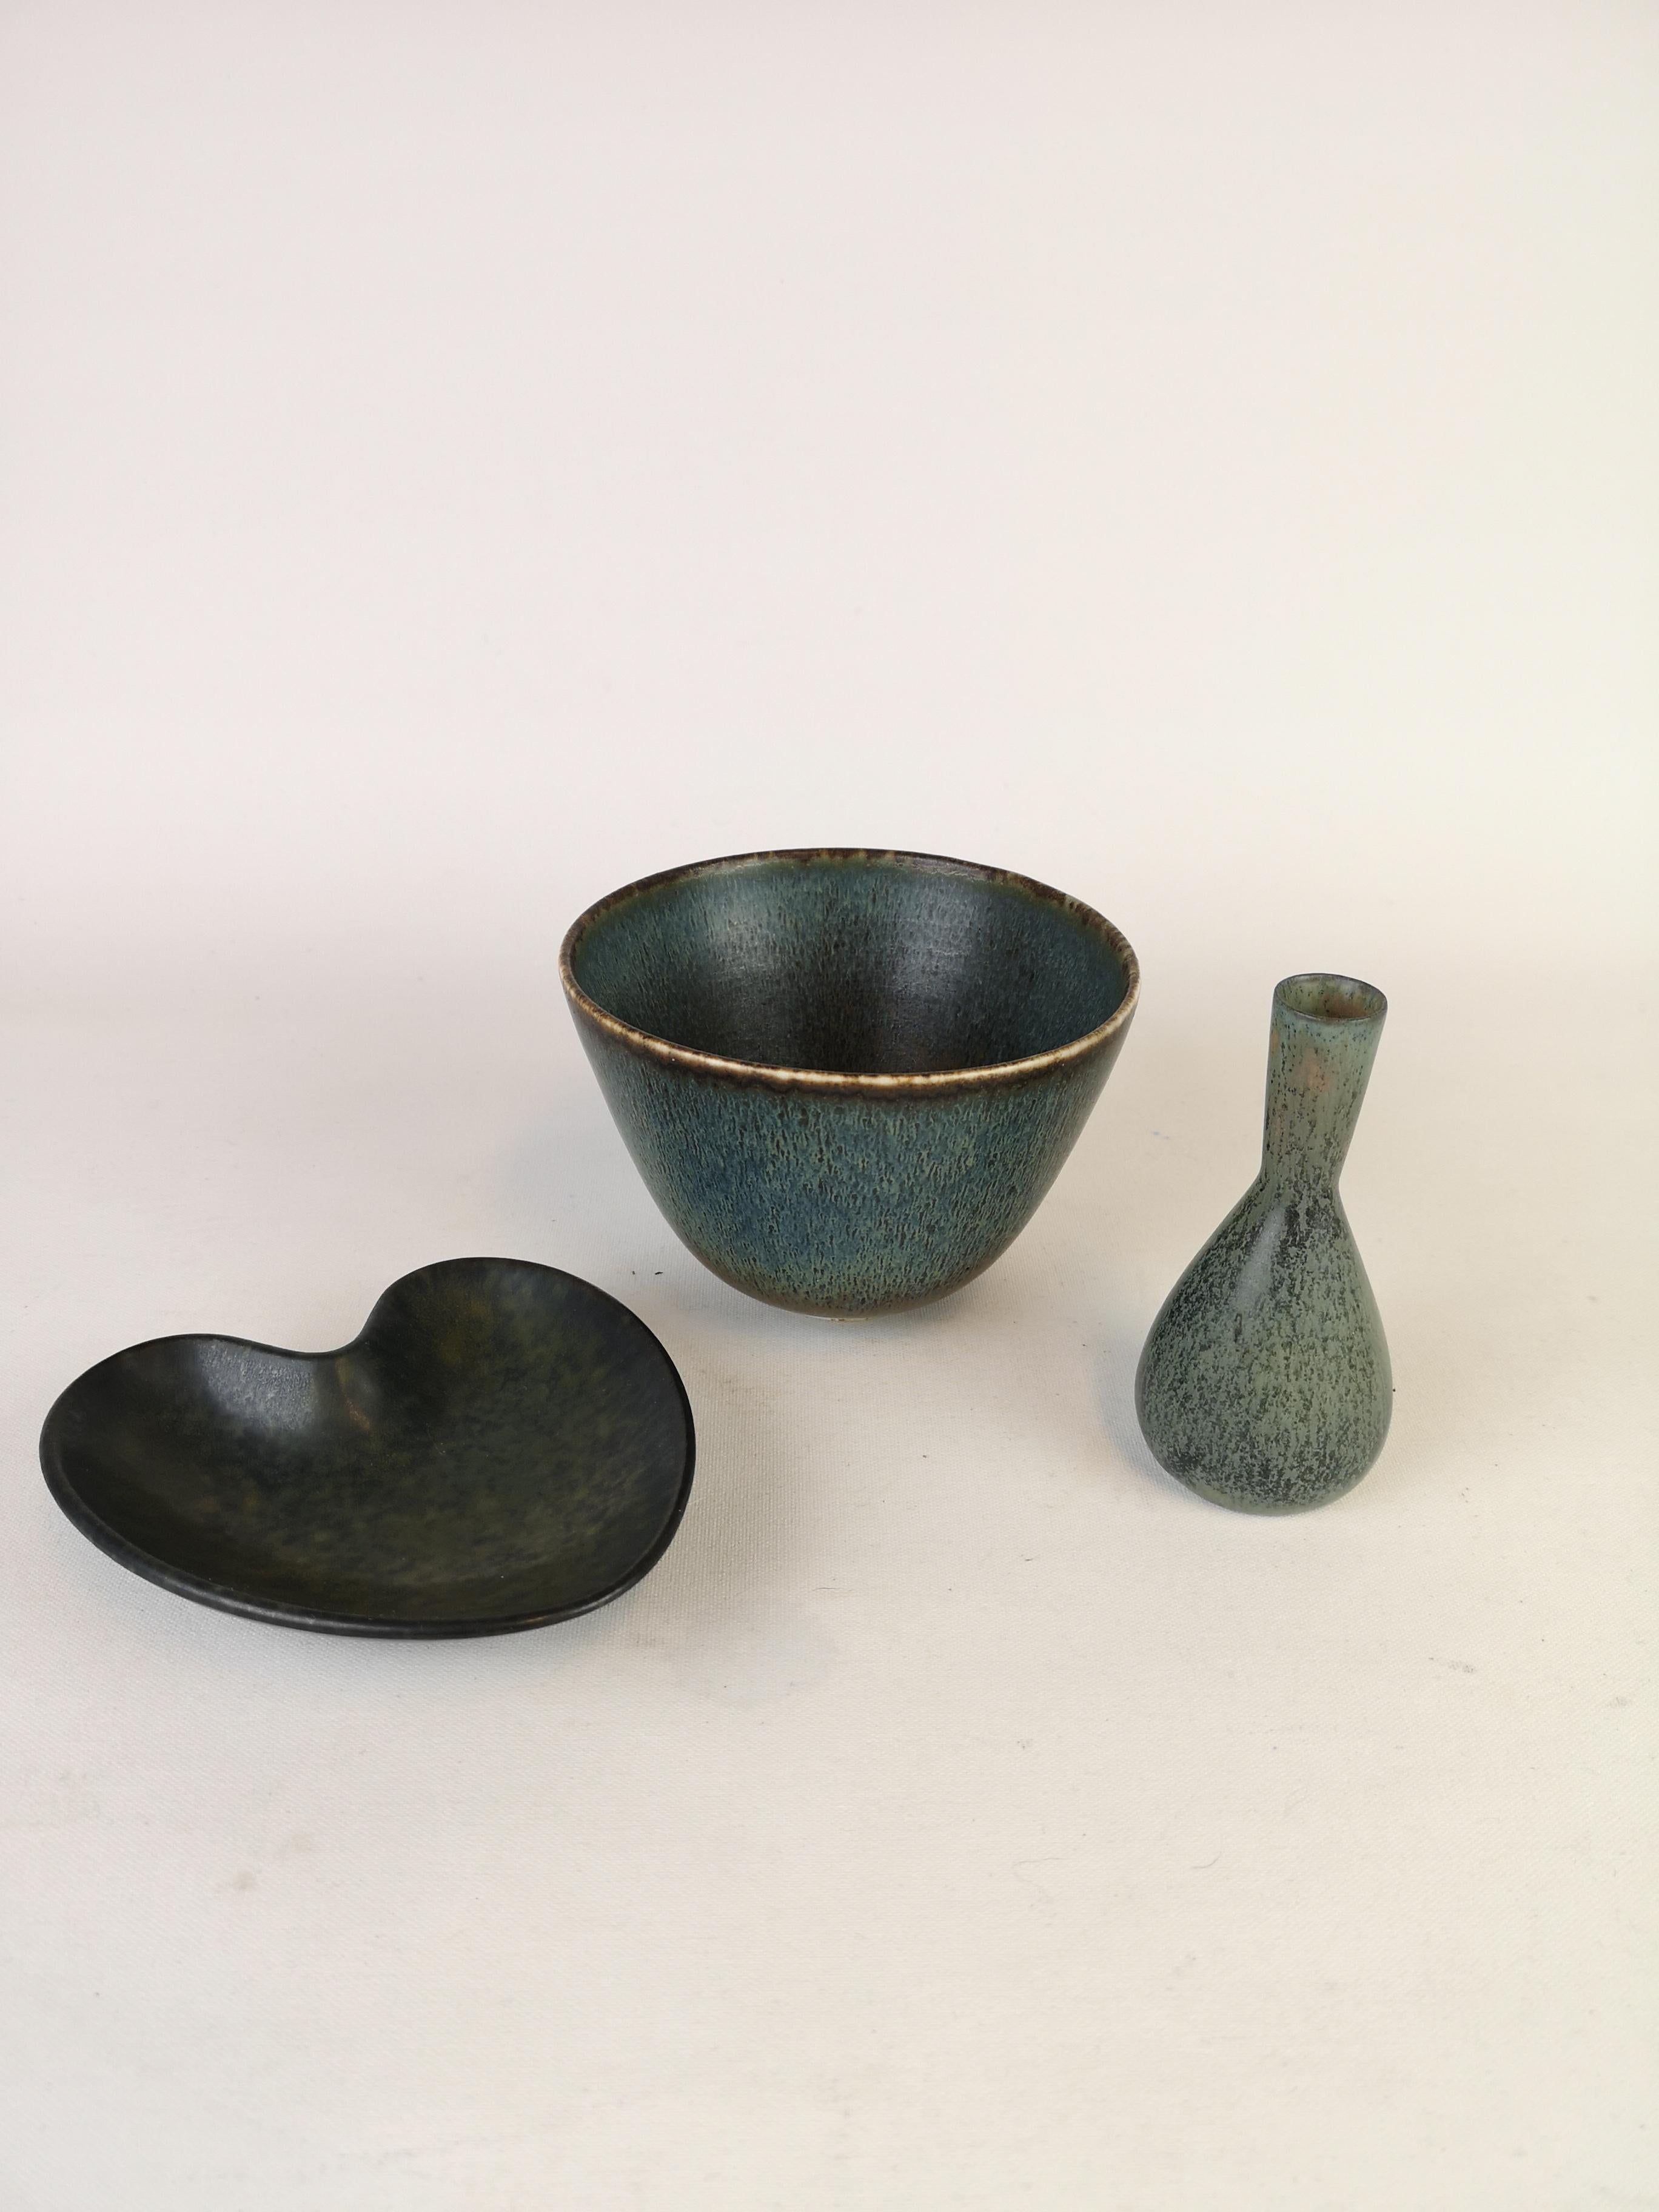 Set of 3 pieces made by Gunnar Nylund and one by Carl-Harry Stålhane. The bowl and the heart shaped bowl are made by Gunnar Nylund and the small vase is made by Stålhane. 

Very good condition

Measures. Bowl H 9 cm D 13, small vase H 11 D 6